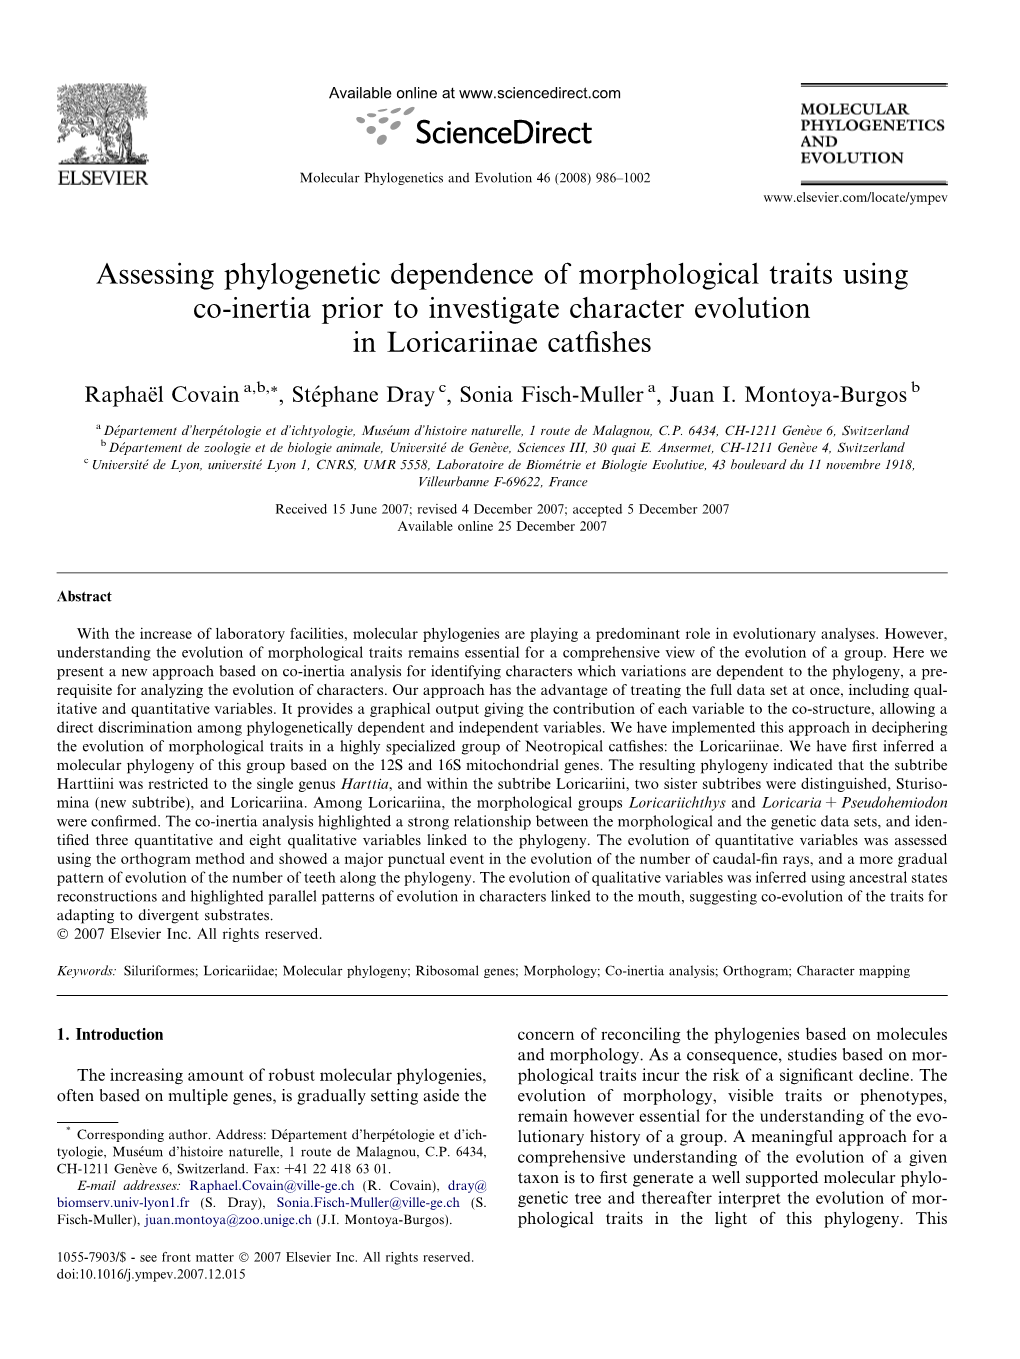 Assessing Phylogenetic Dependence of Morphological Traits Using Co-Inertia Prior to Investigate Character Evolution in Loricariinae Catﬁshes